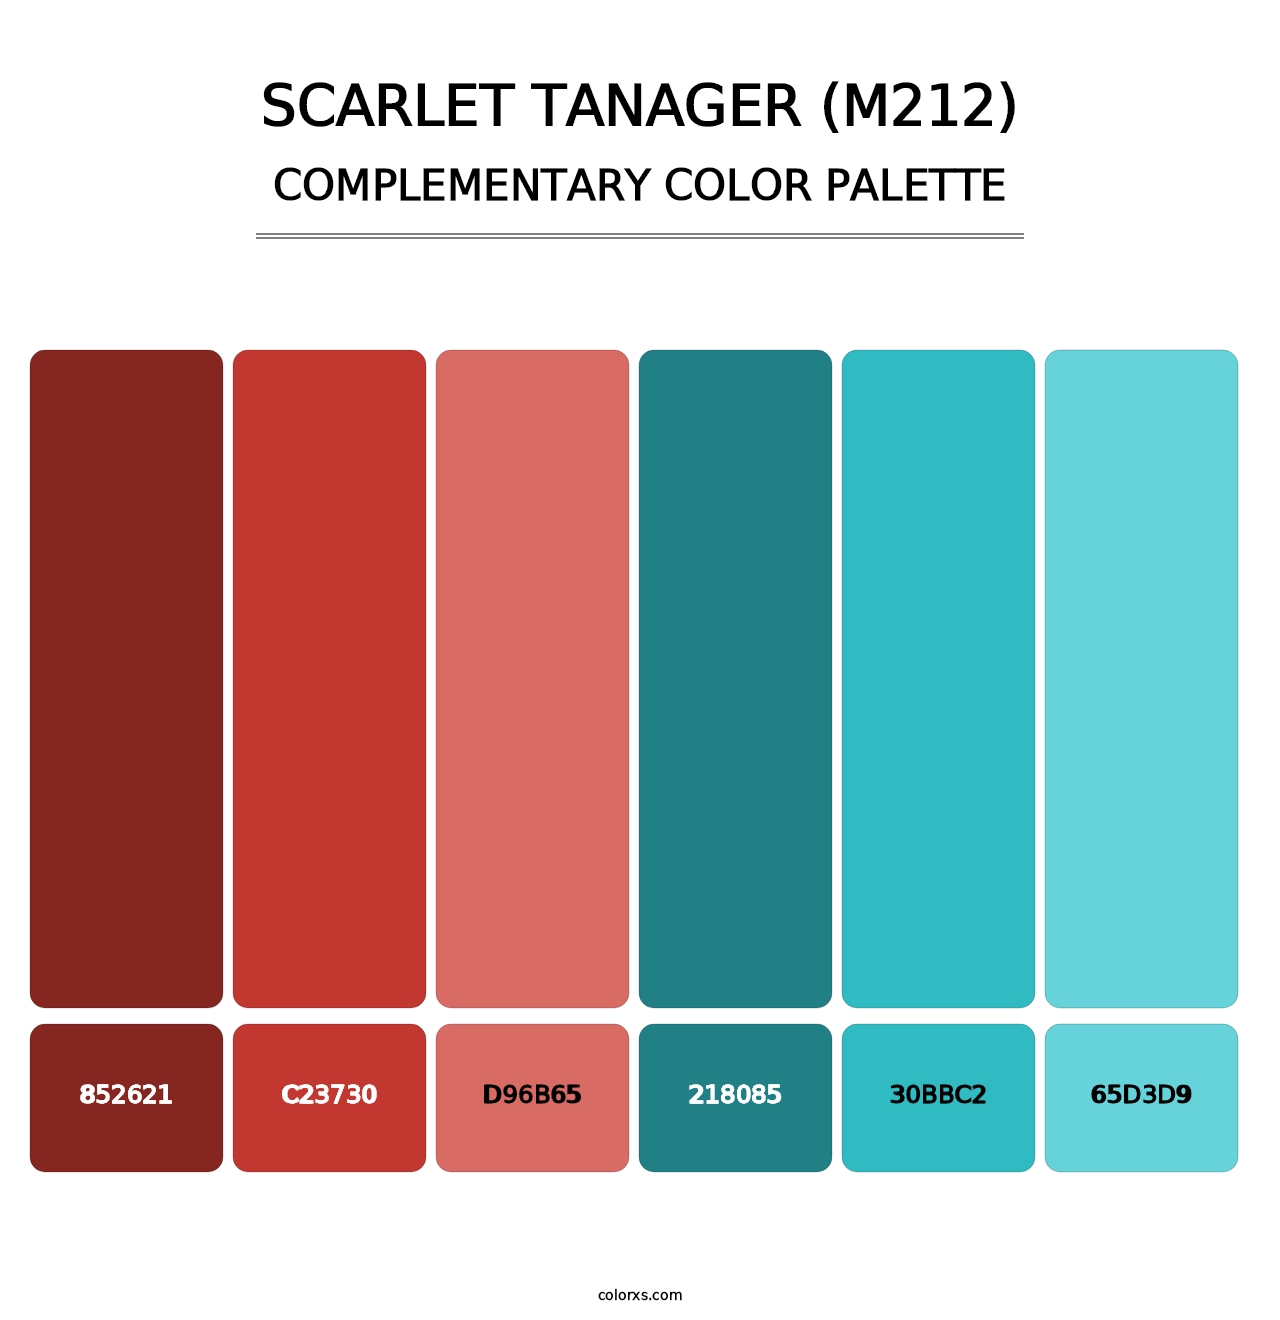 Scarlet Tanager (M212) - Complementary Color Palette